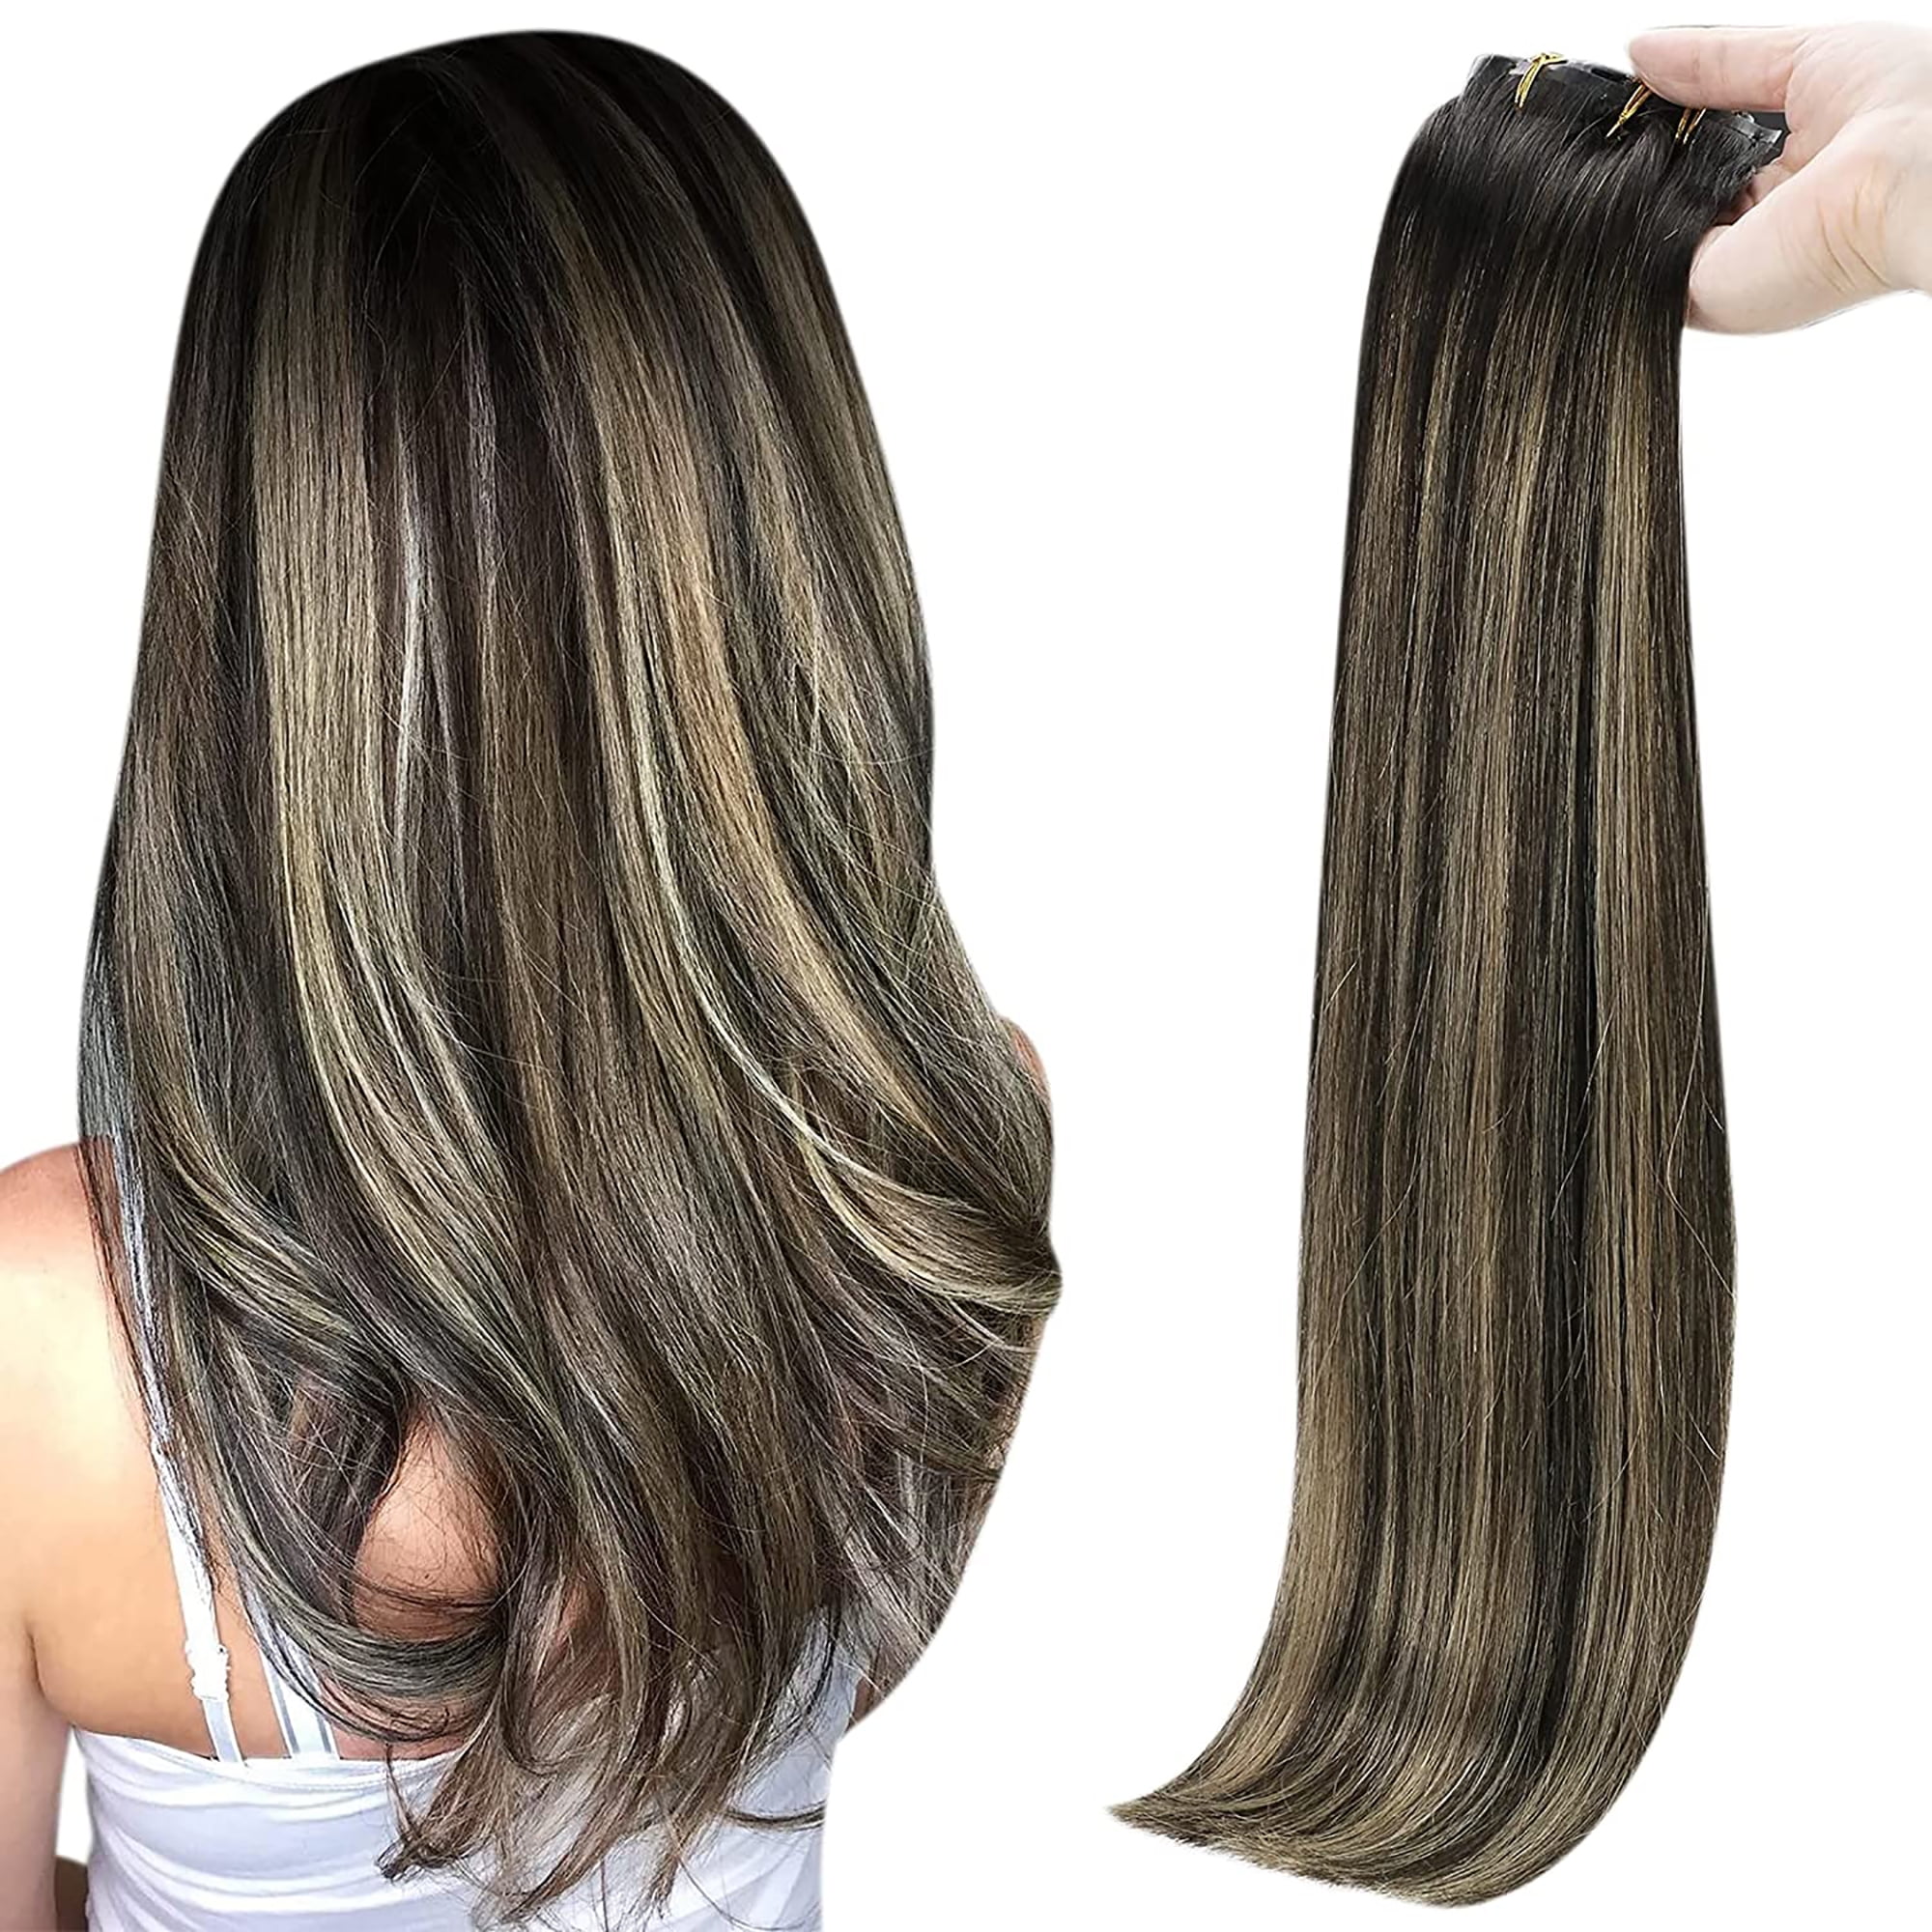 Full Shine Clip in Human Hair Extensions 16 inch Balayage 1b/27/1b Dark  Roots Remy Hair Clip in Extensions Invisible PU Weft for Thin Hair 8 Pcs  100g 